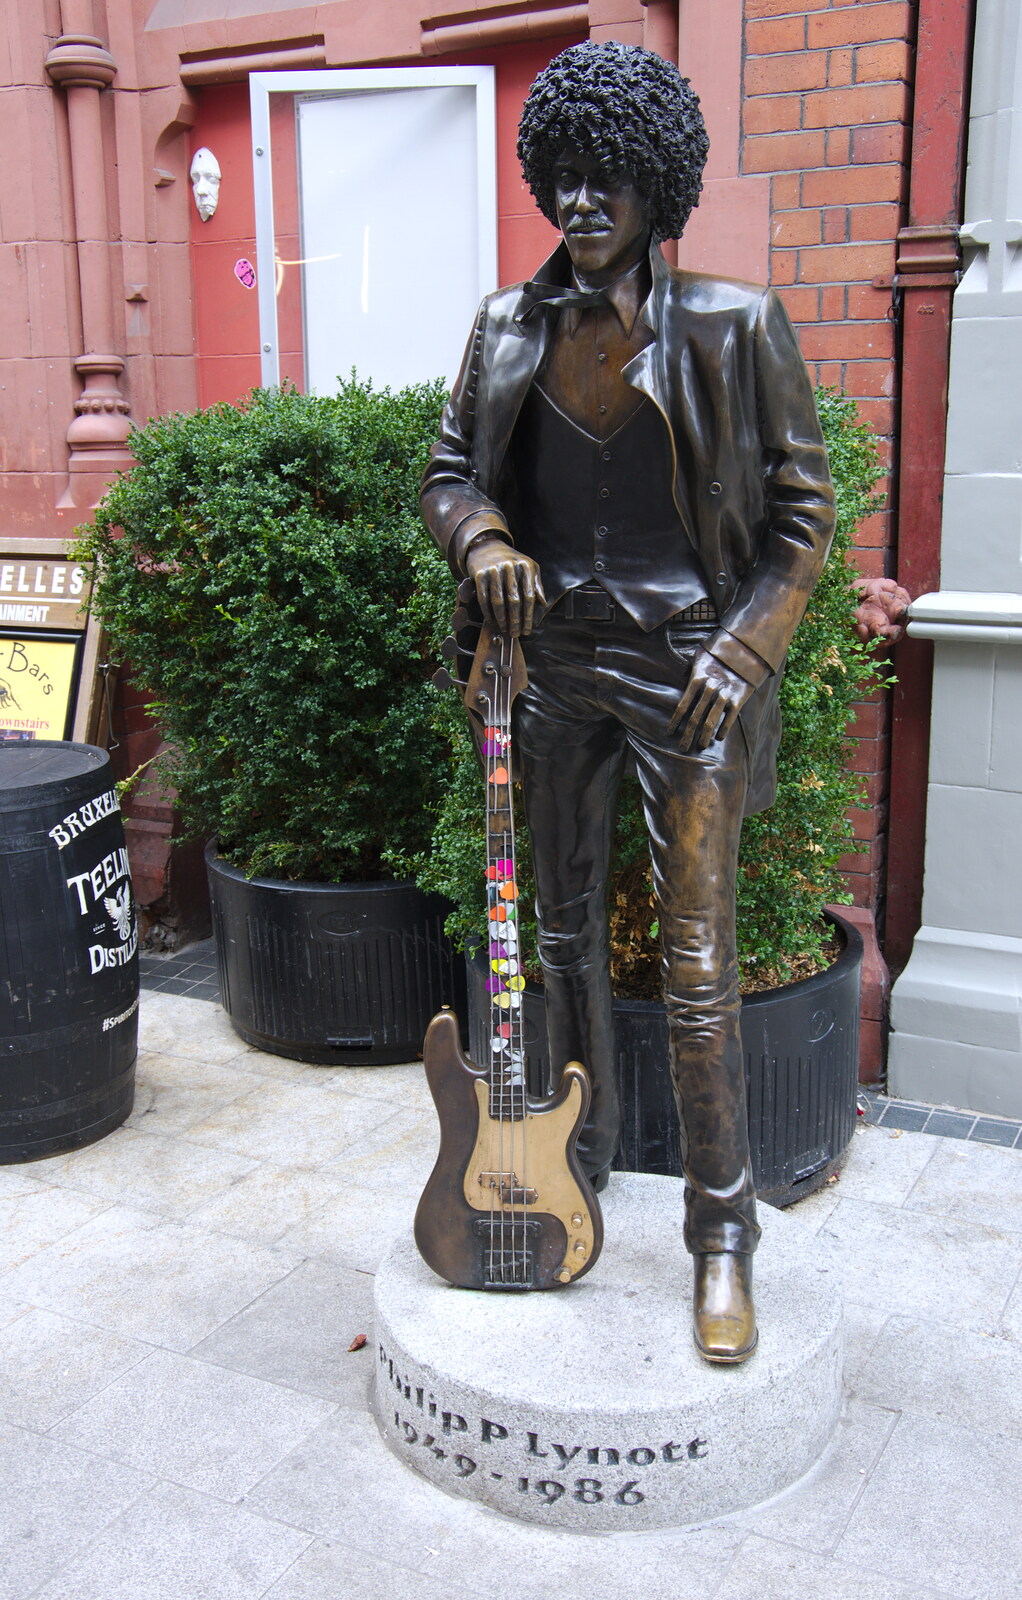 The statue of Phil Lynott from Busking in Temple Bar, Dublin, Ireland - 12th August 2019